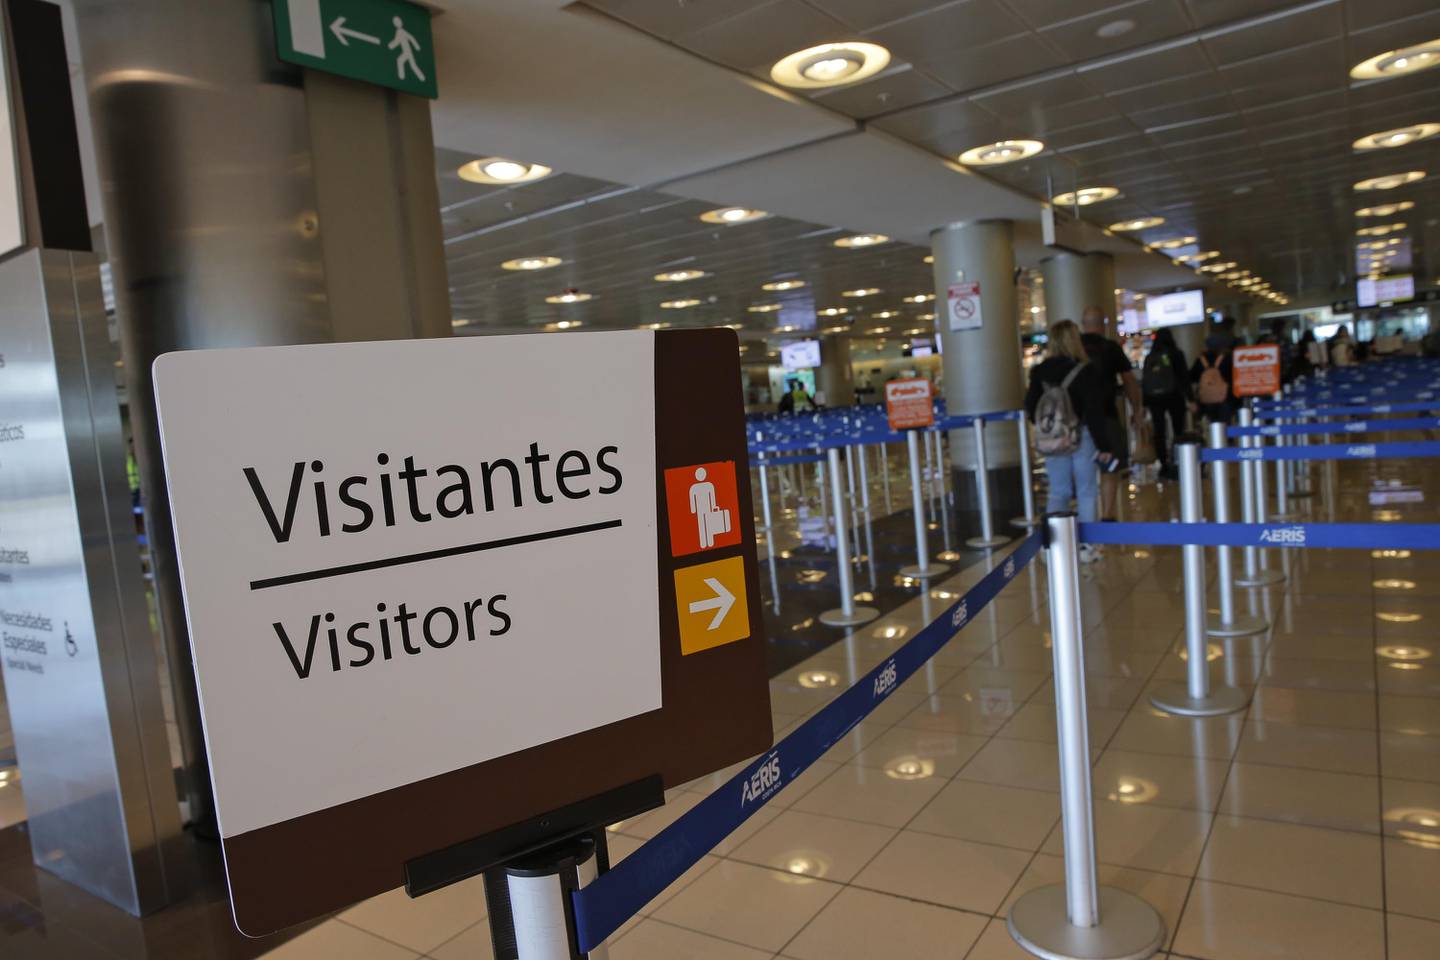 These are the new entry requirements for foreigners to Costa Rica